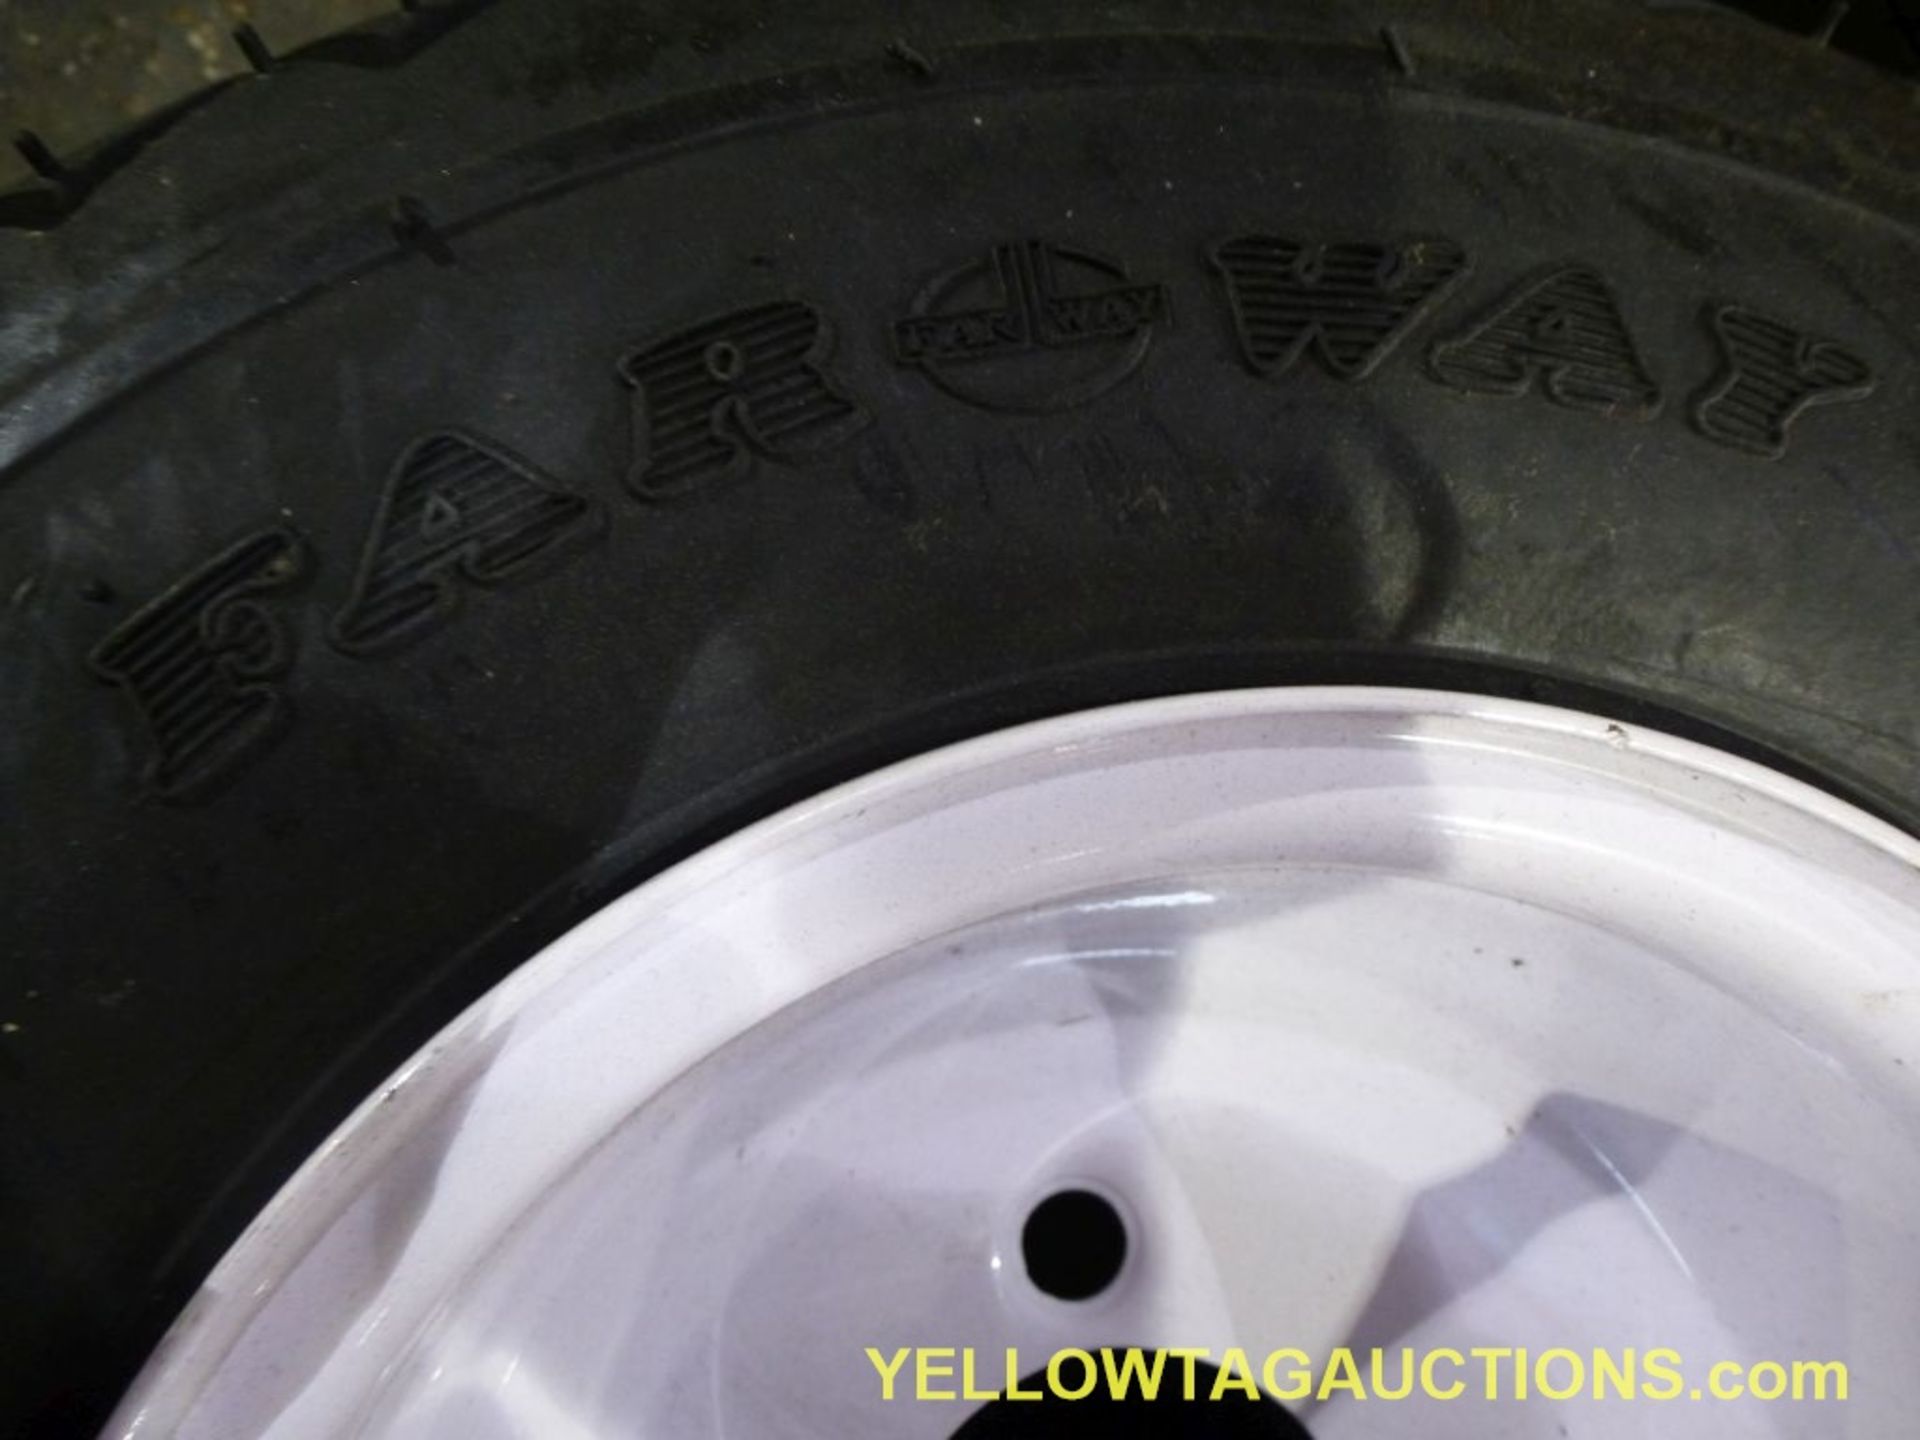 Lot of (12) FarWay 6-Ply Nylon Tires & Wheels|18 X 8.50 - 8NHS|Tag: 449 - Image 3 of 8